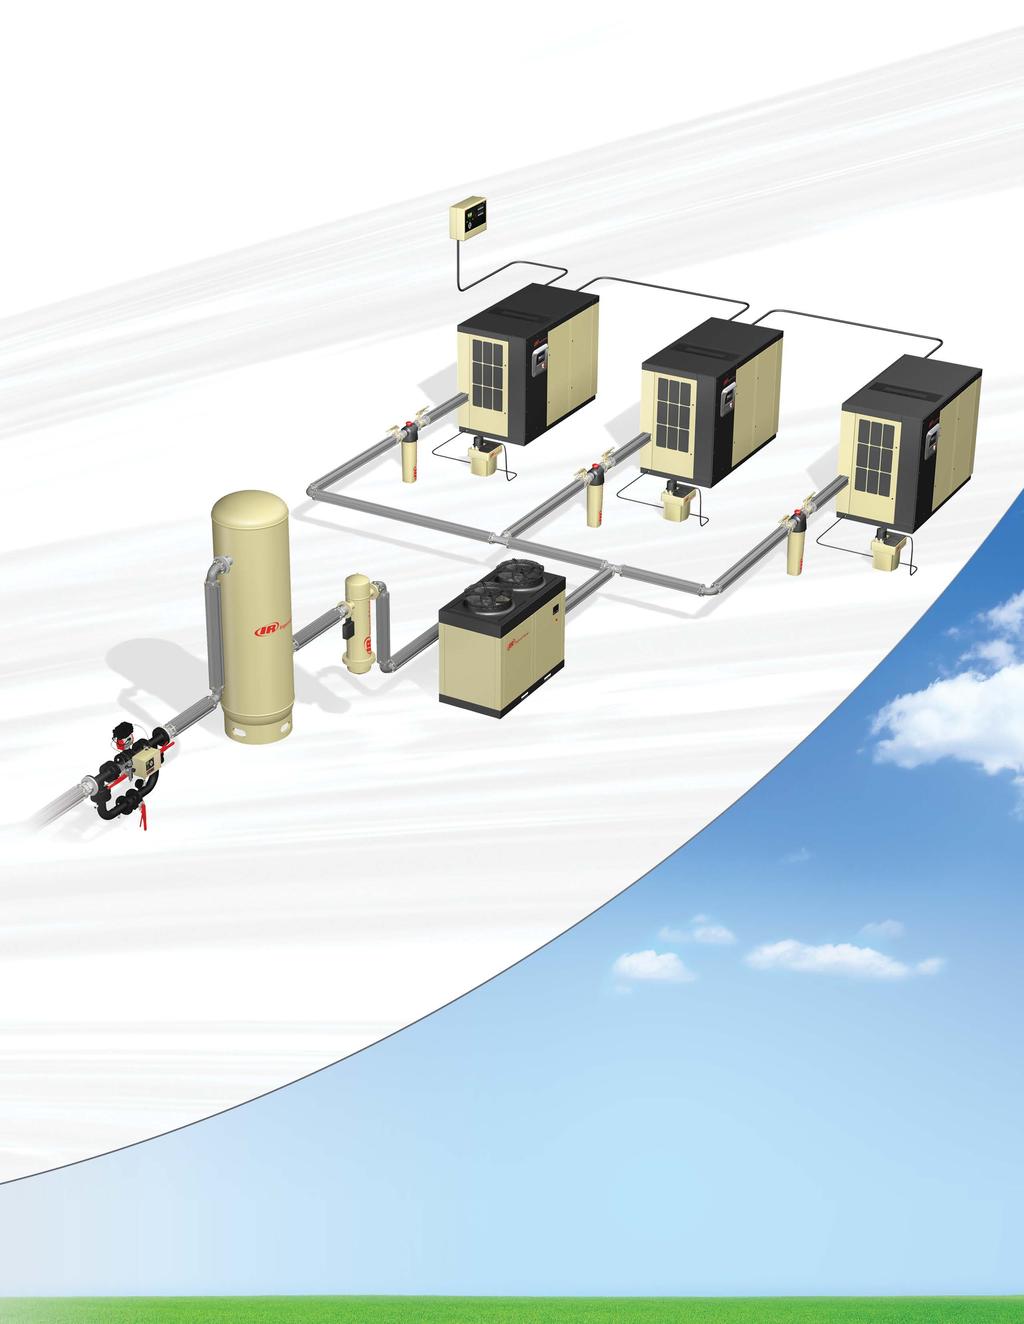 From compressors to system automation and everything in between, Ingersoll Rand is your total solution provider.